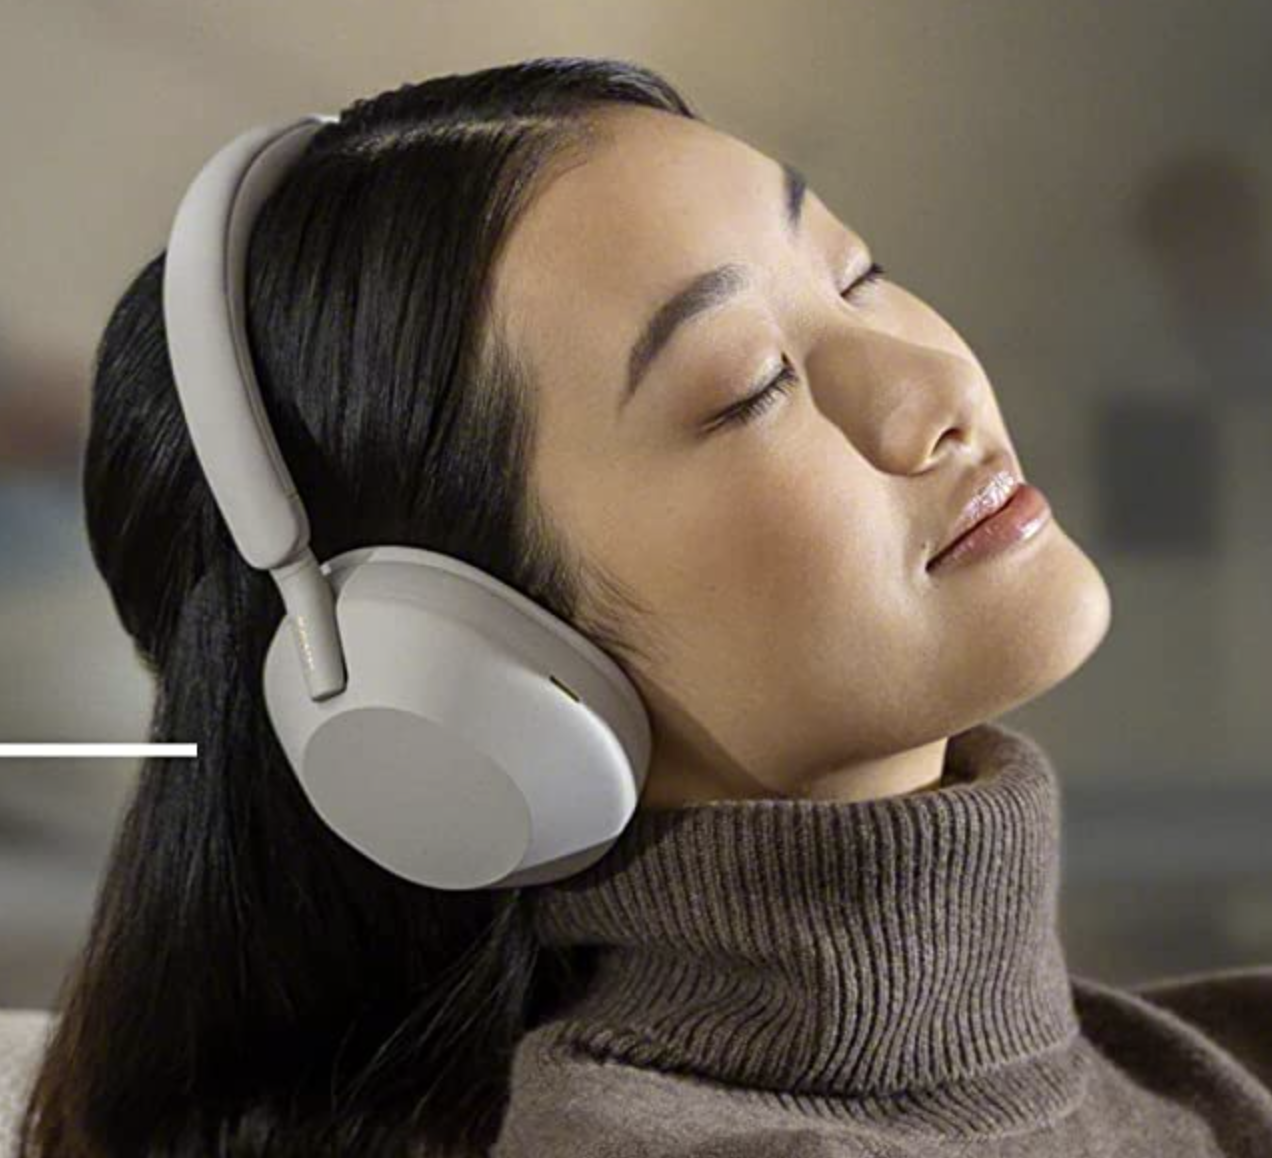 a person wearing the headphones with their eyes closed